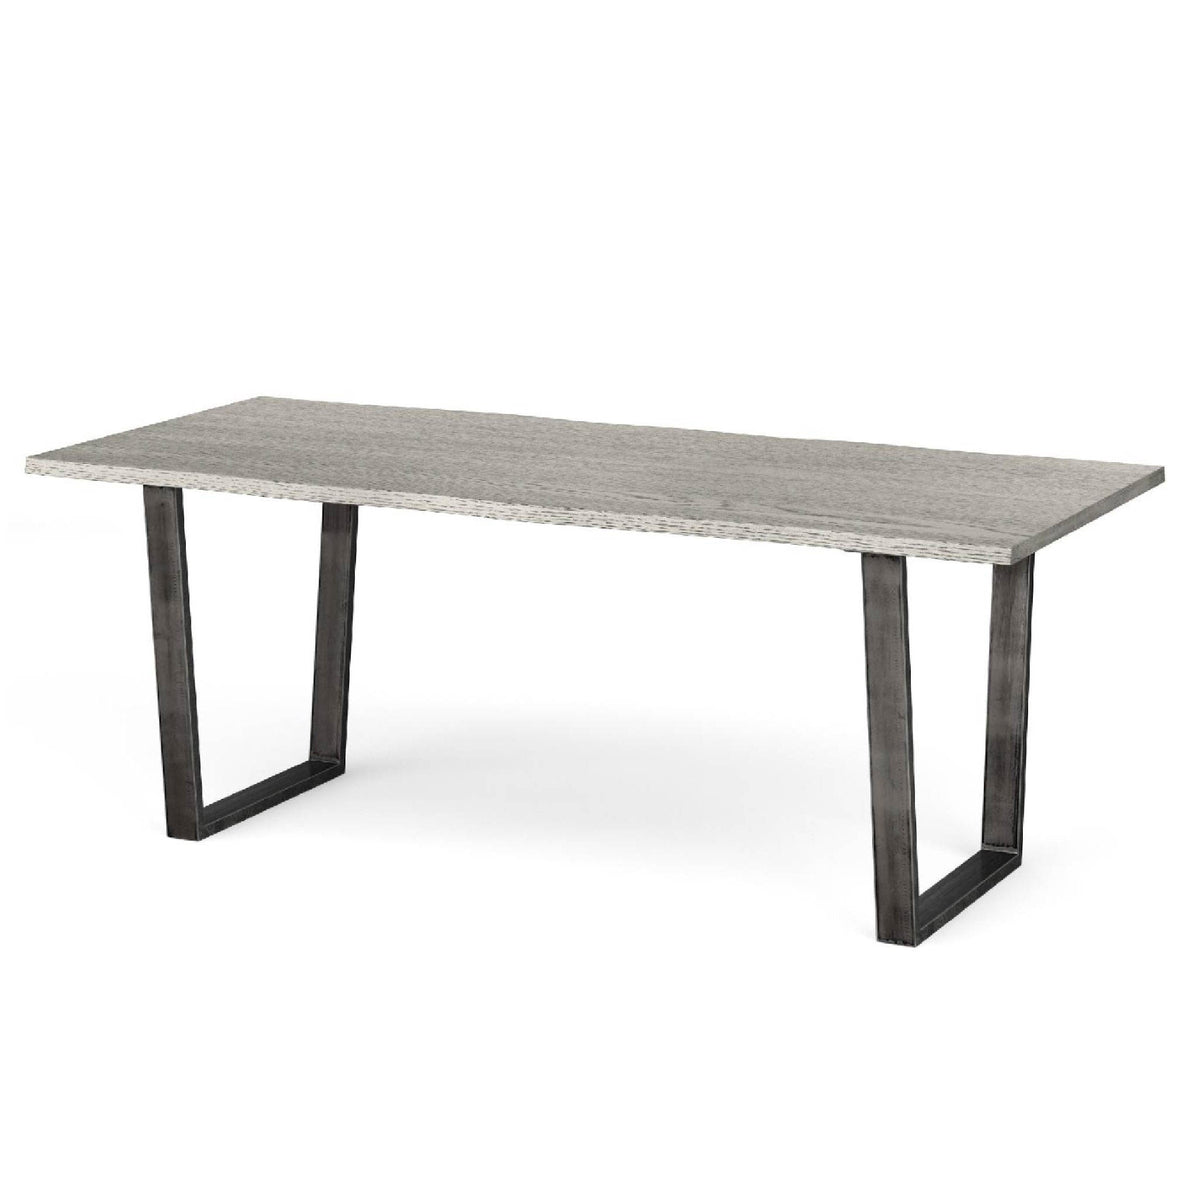 Soho Large Industrial Grey Dining Table with Oak Top and Metal Legs - Side view